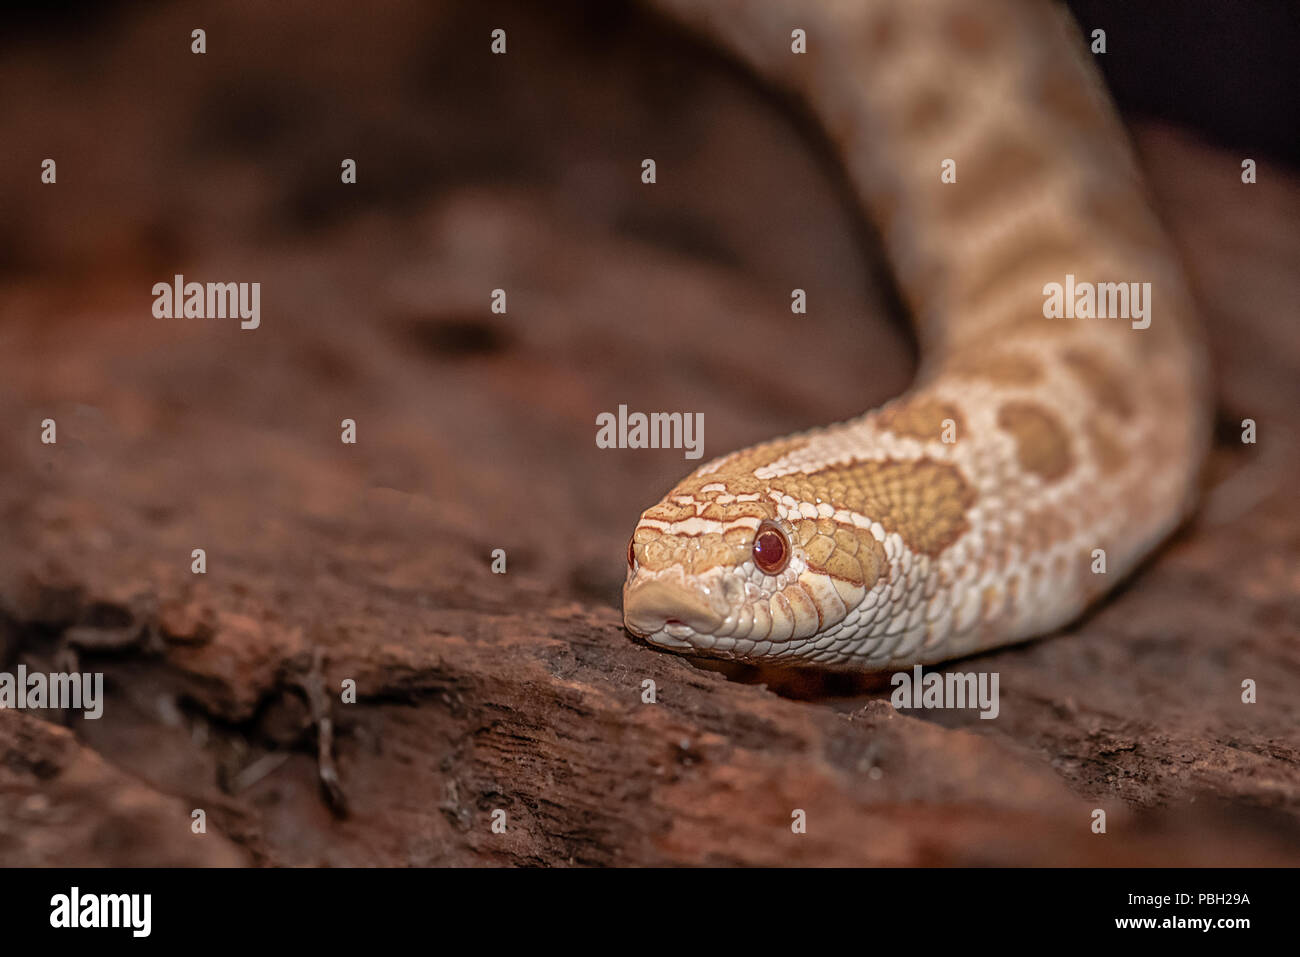 A close up of the head pf a Hognose snake. It is on a piece of old wood. It is face on to the camera. With copy space Stock Photo